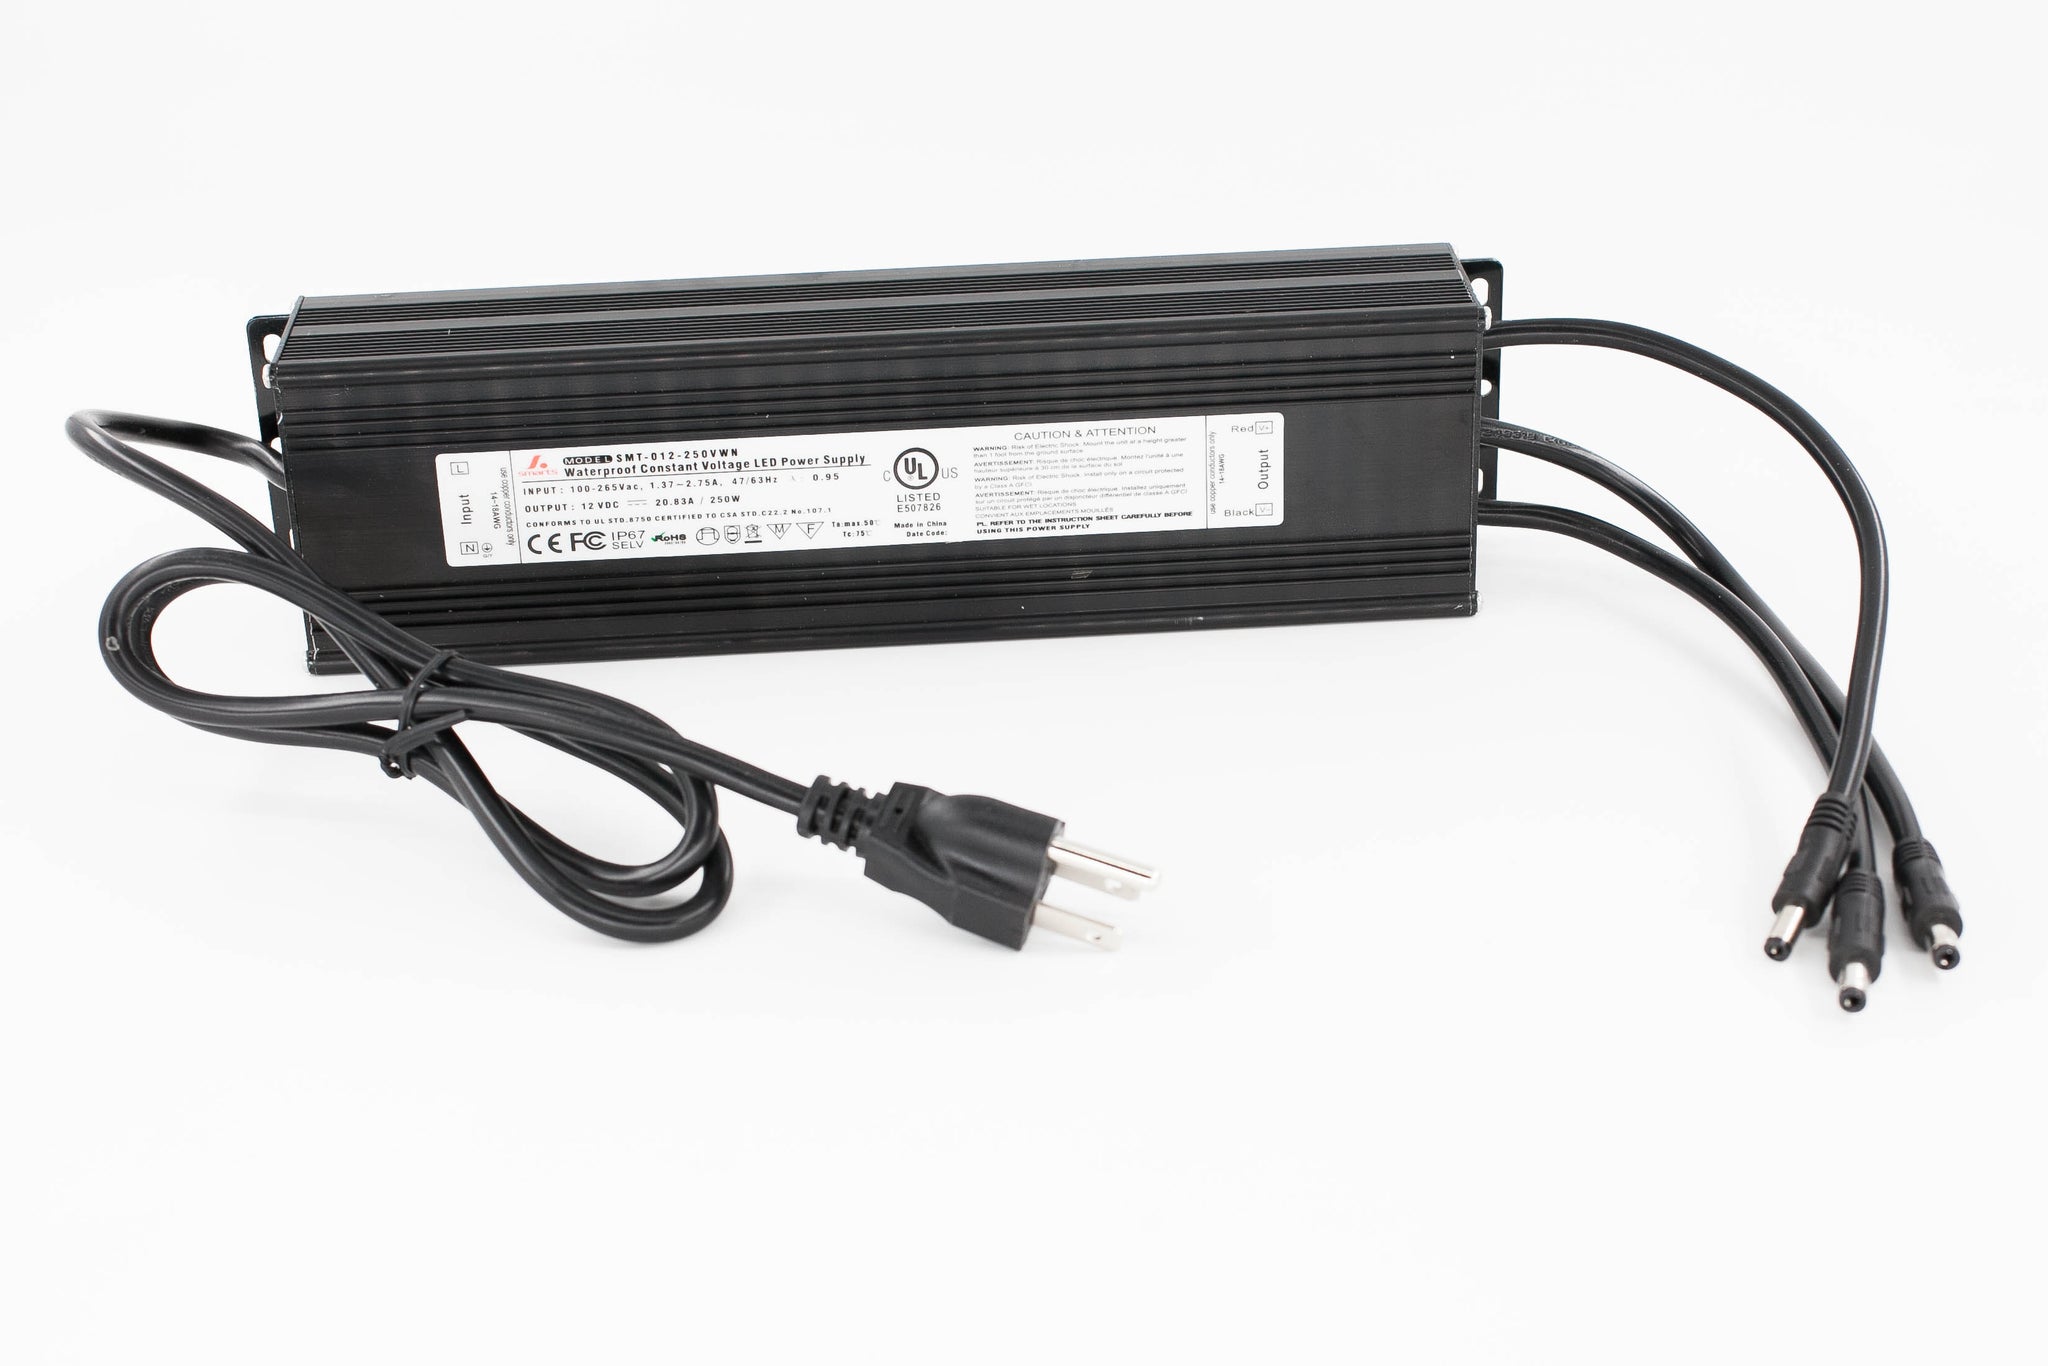 UL Listed 12V 250W 20.83 Amps LED Light Power Supply IP67 Waterproof